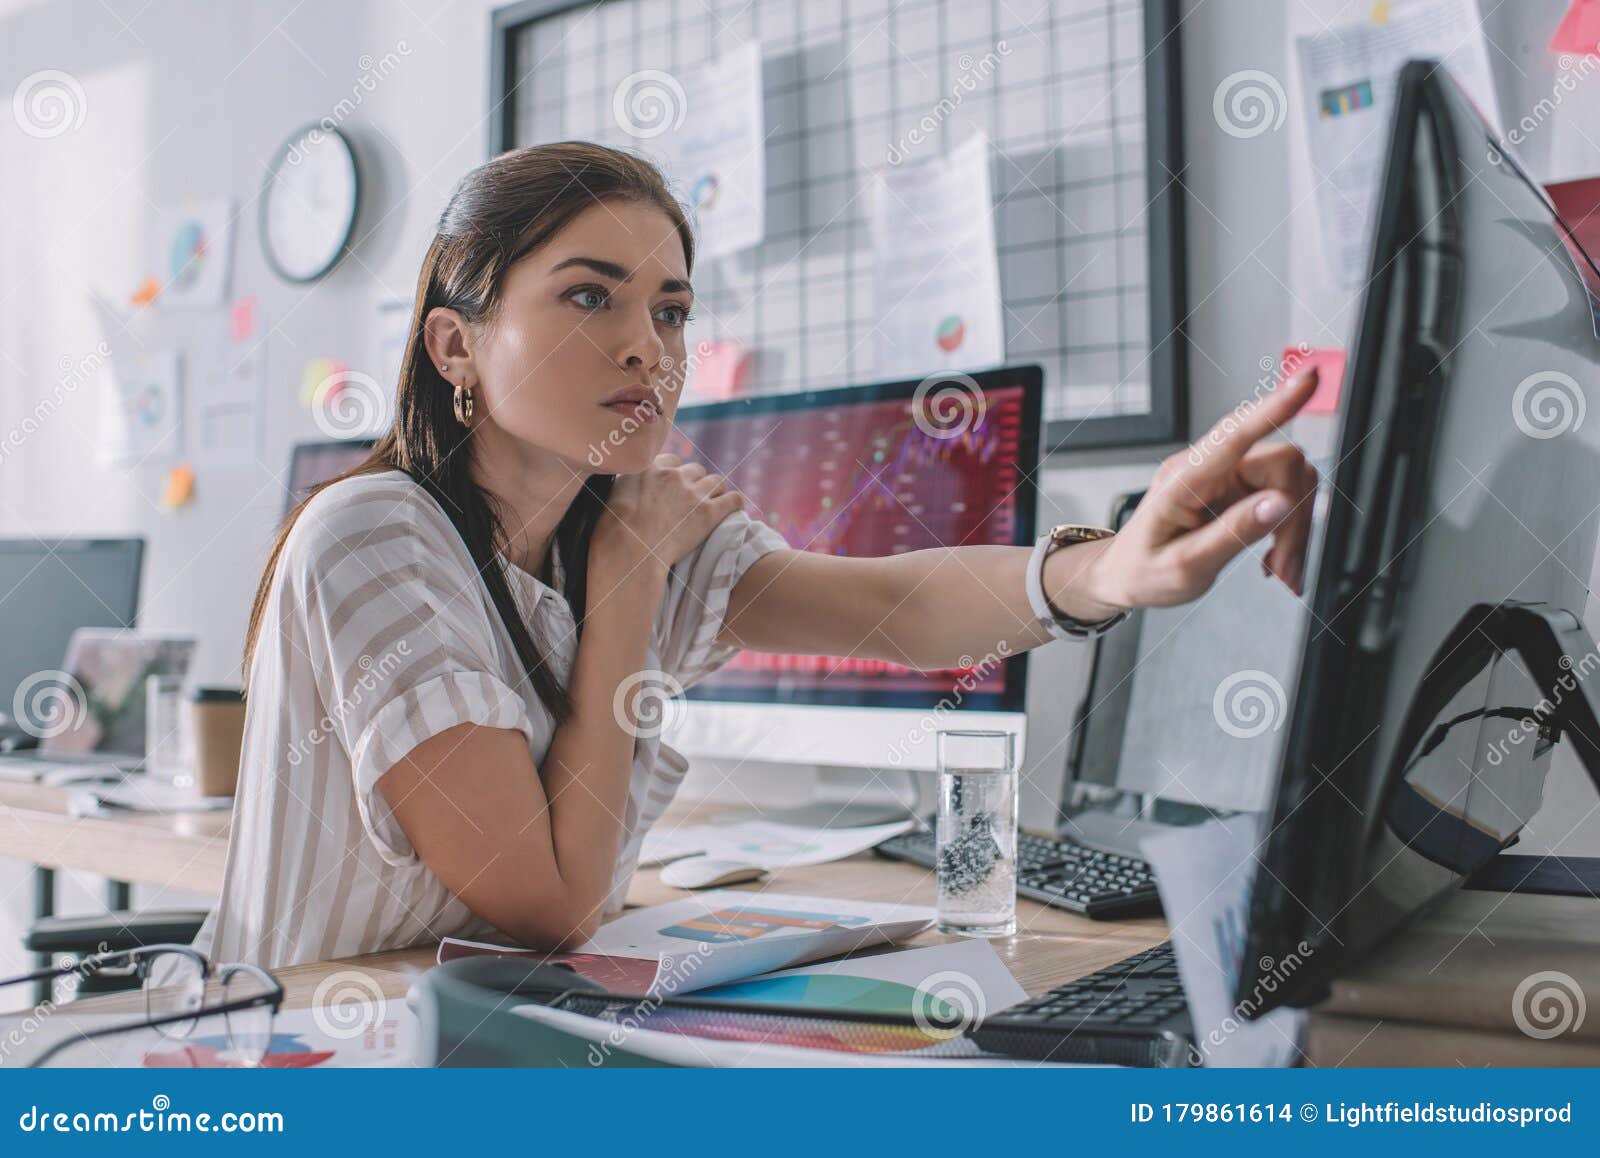 selective focus of data analyst pointing with finger at computer monitor near papers and glass of water